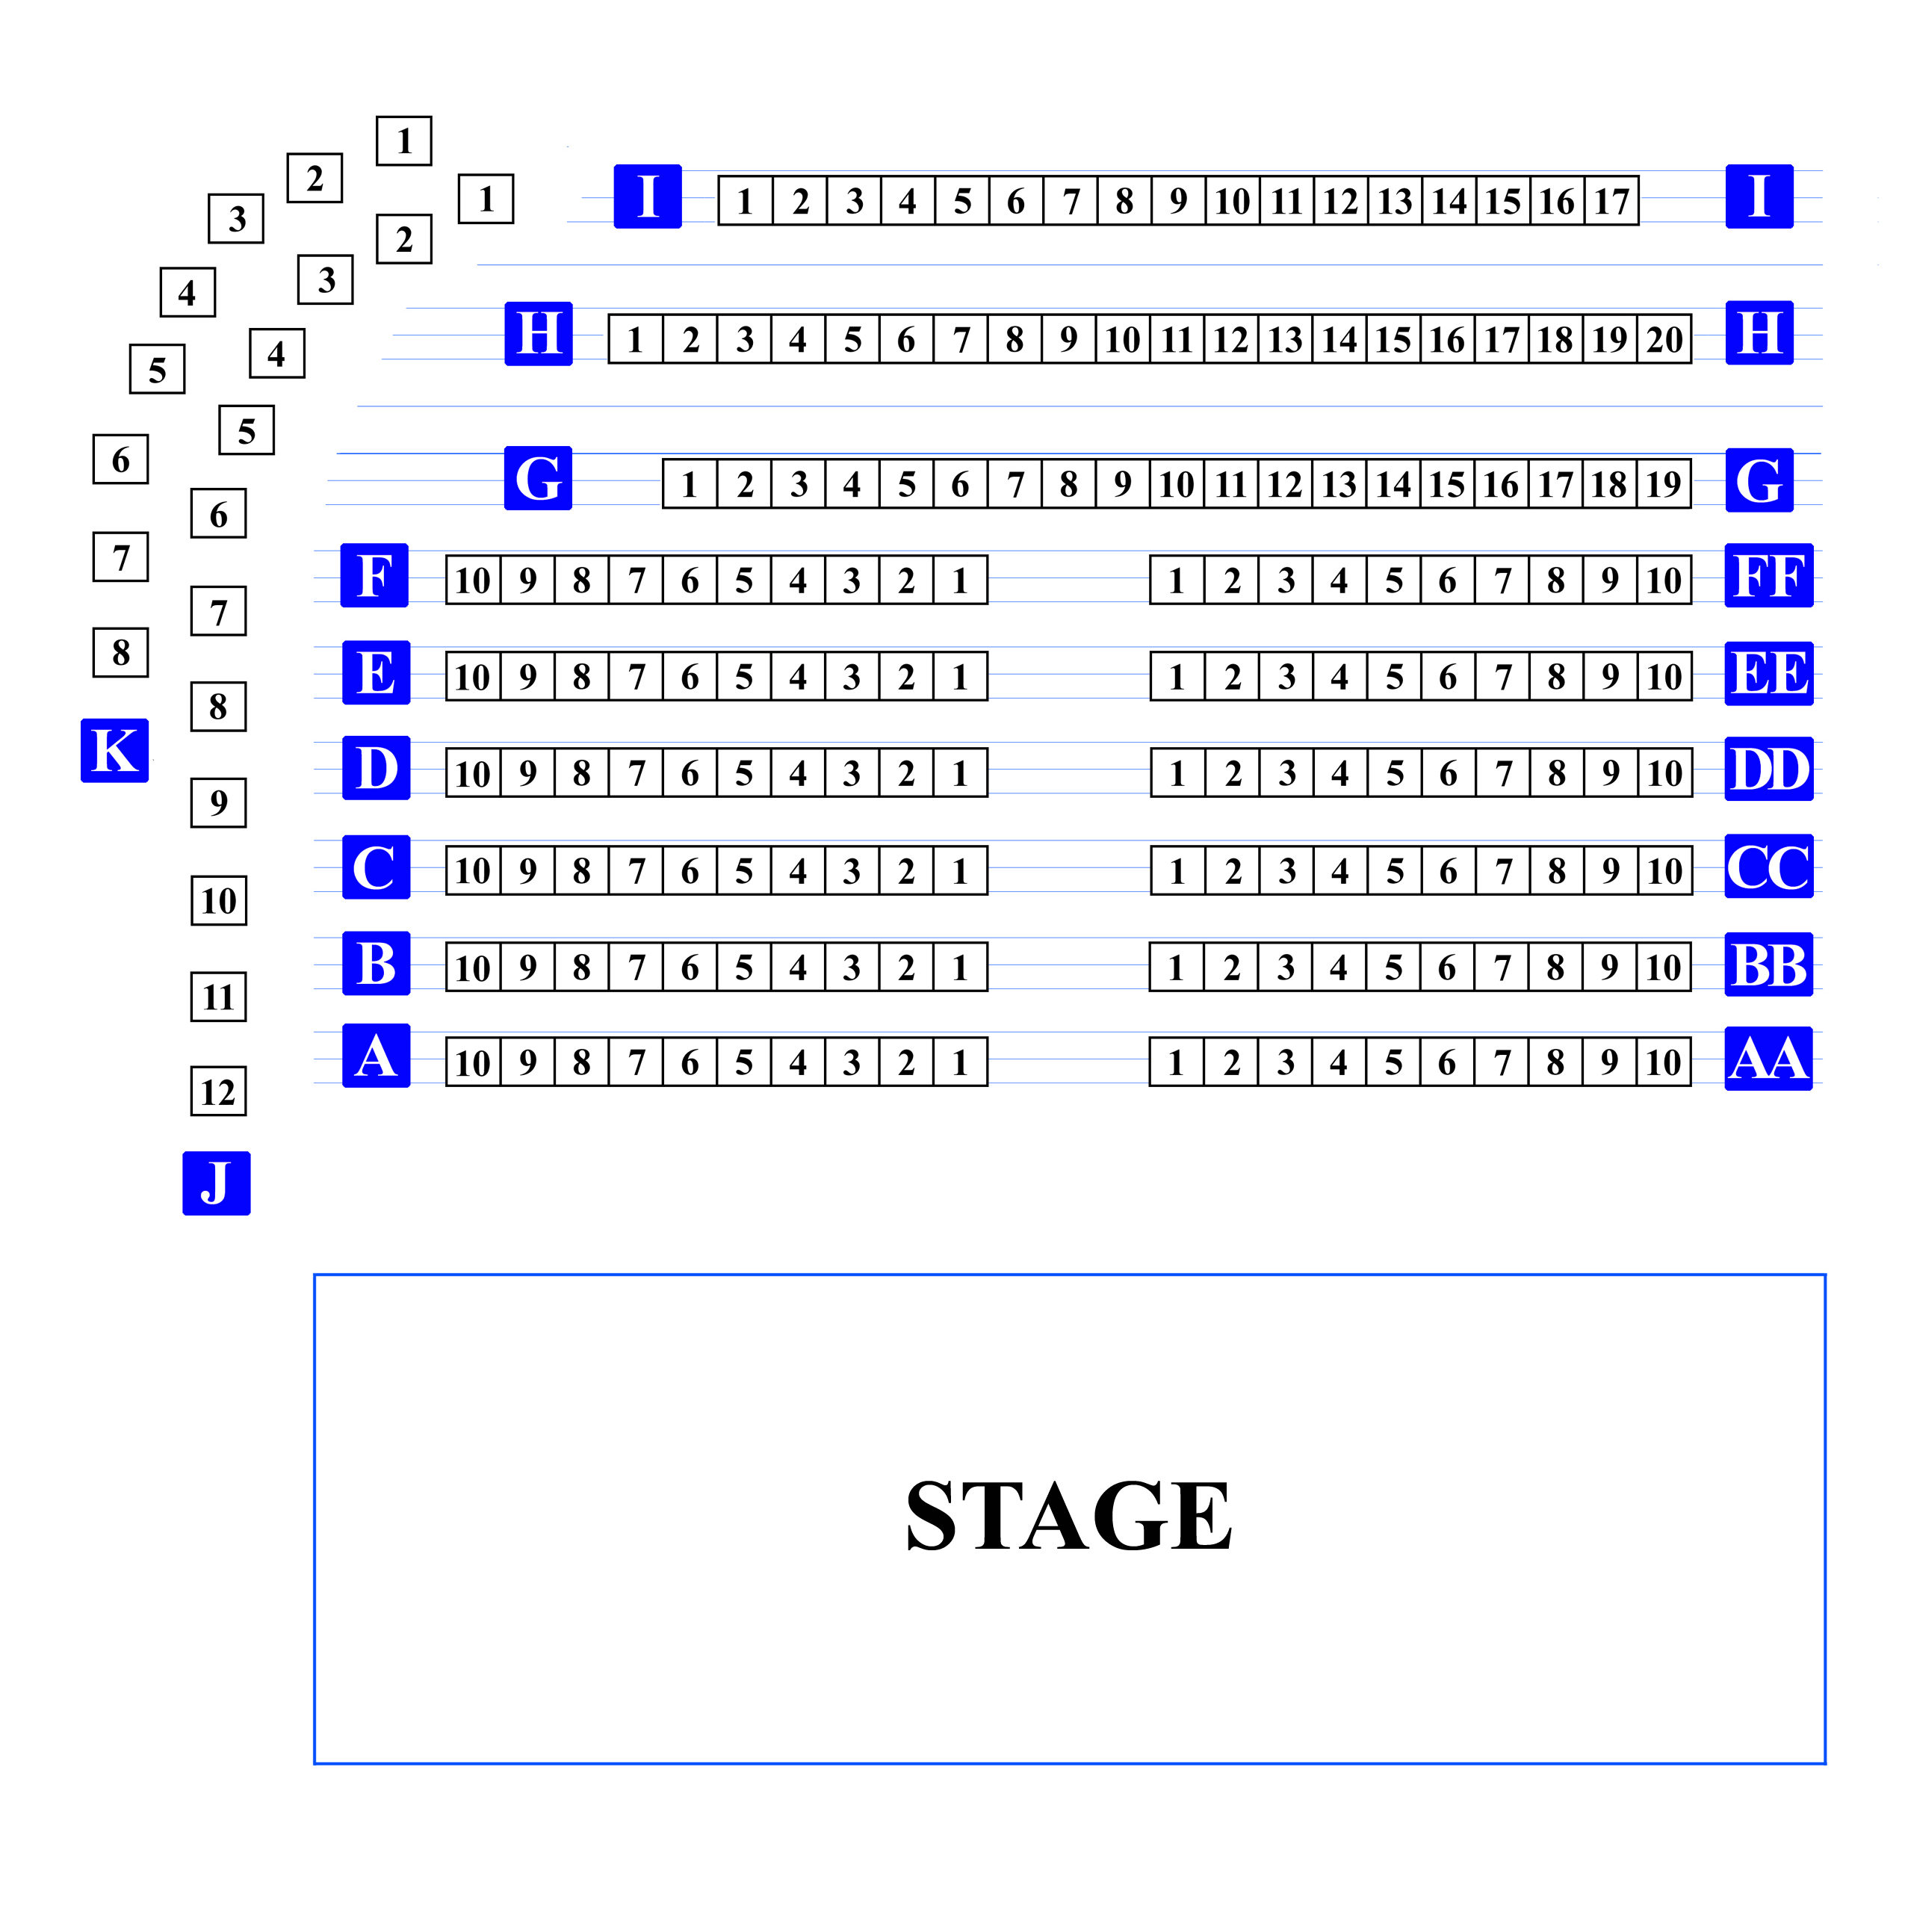 Writers Theater Seating Chart